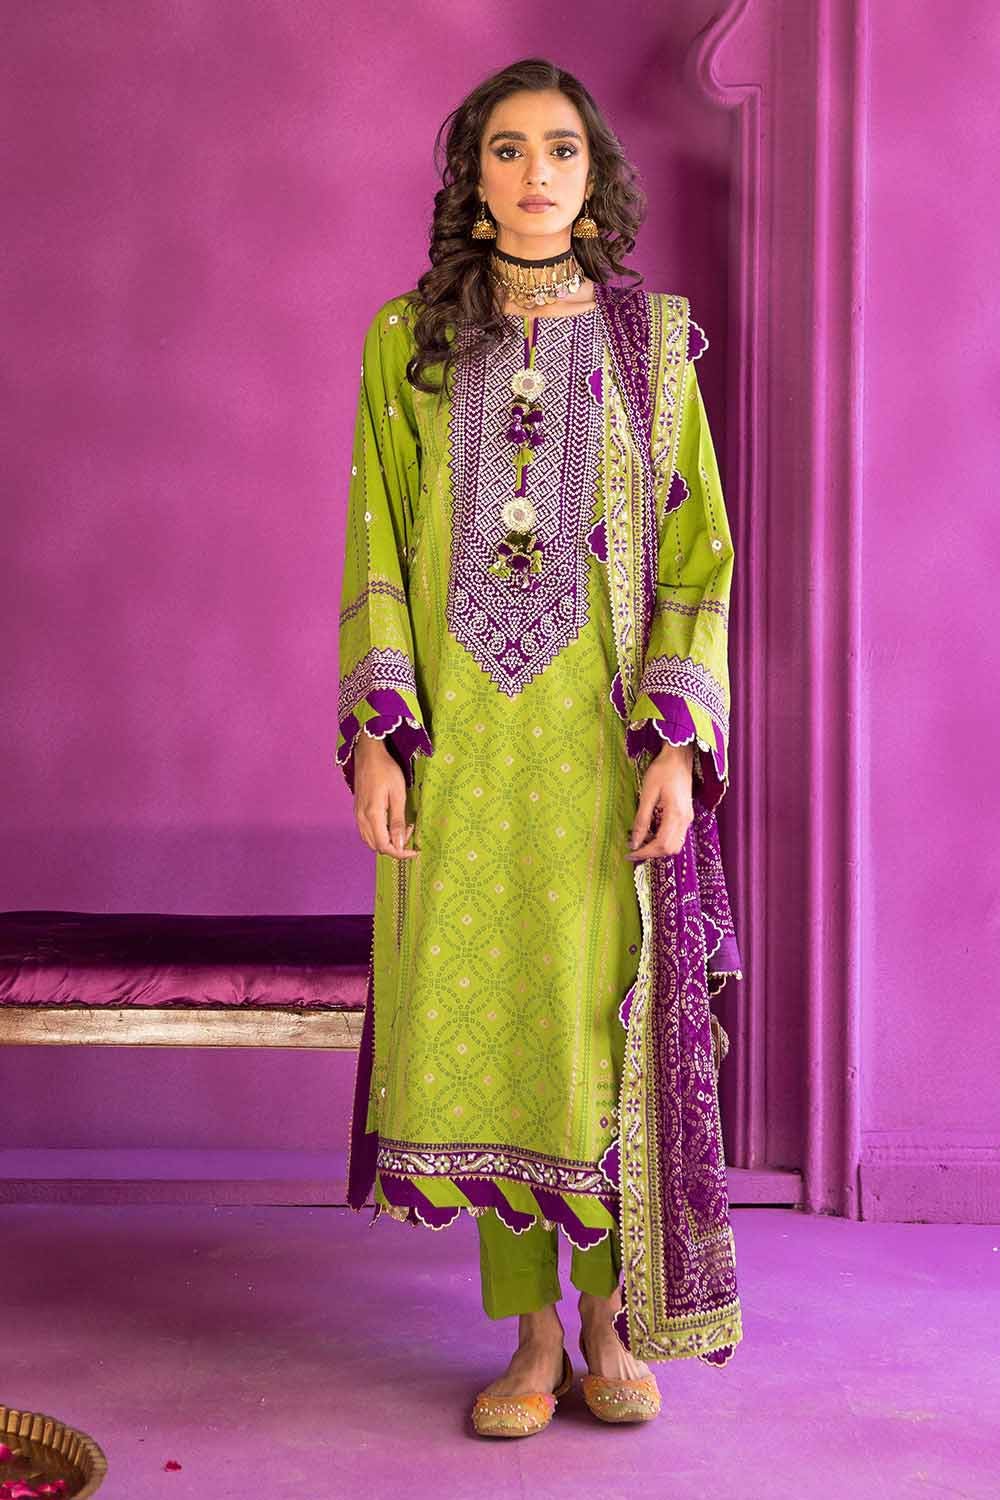 Gul Ahmed 3PC Embroidered Chunri Lawn Unstitched Suit With Chiffon Gold and Lacquer Printed Dupatta BM-32011